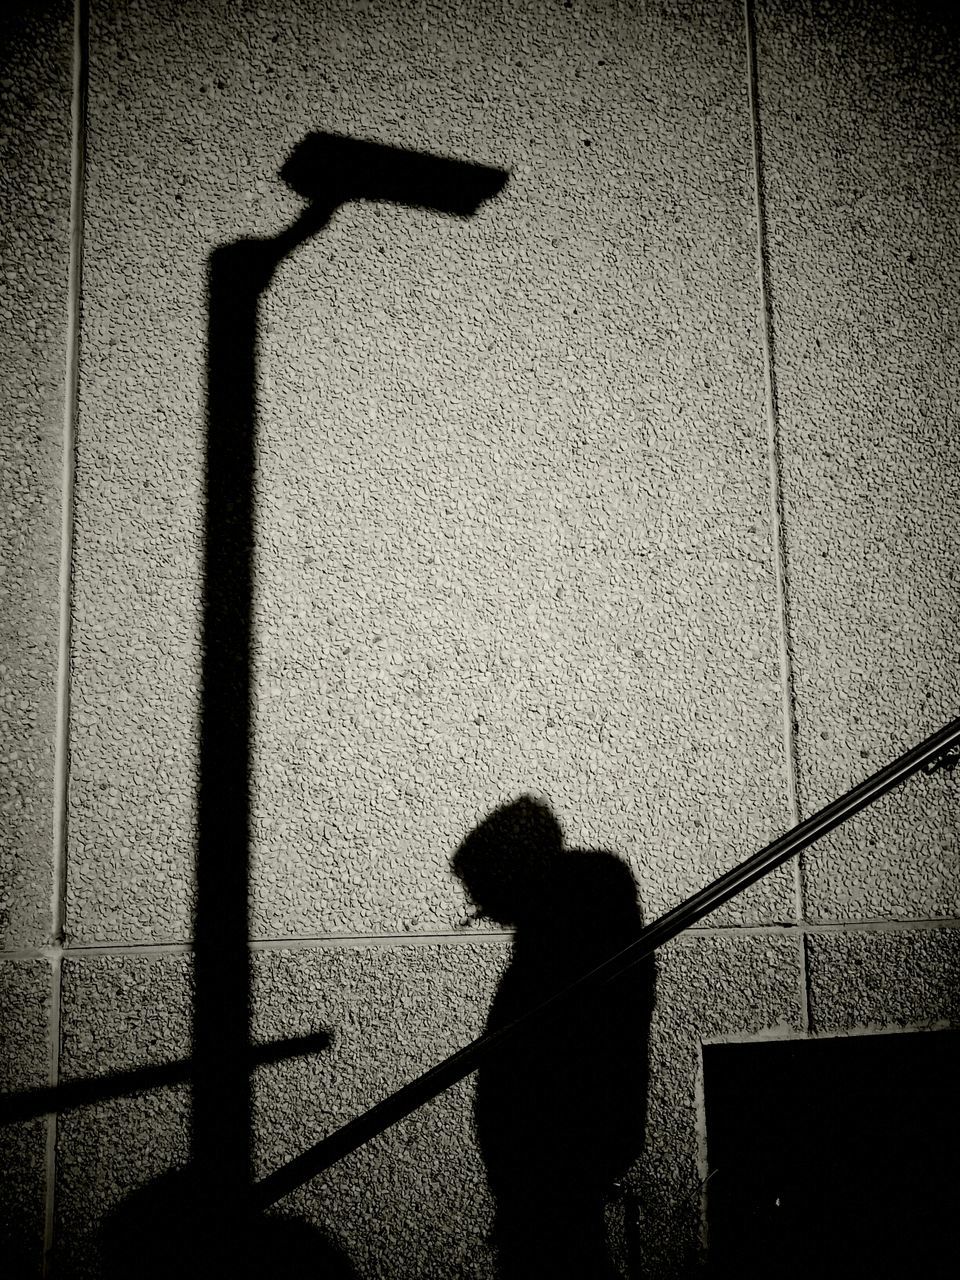 SHADOW OF PERSON ON WALL